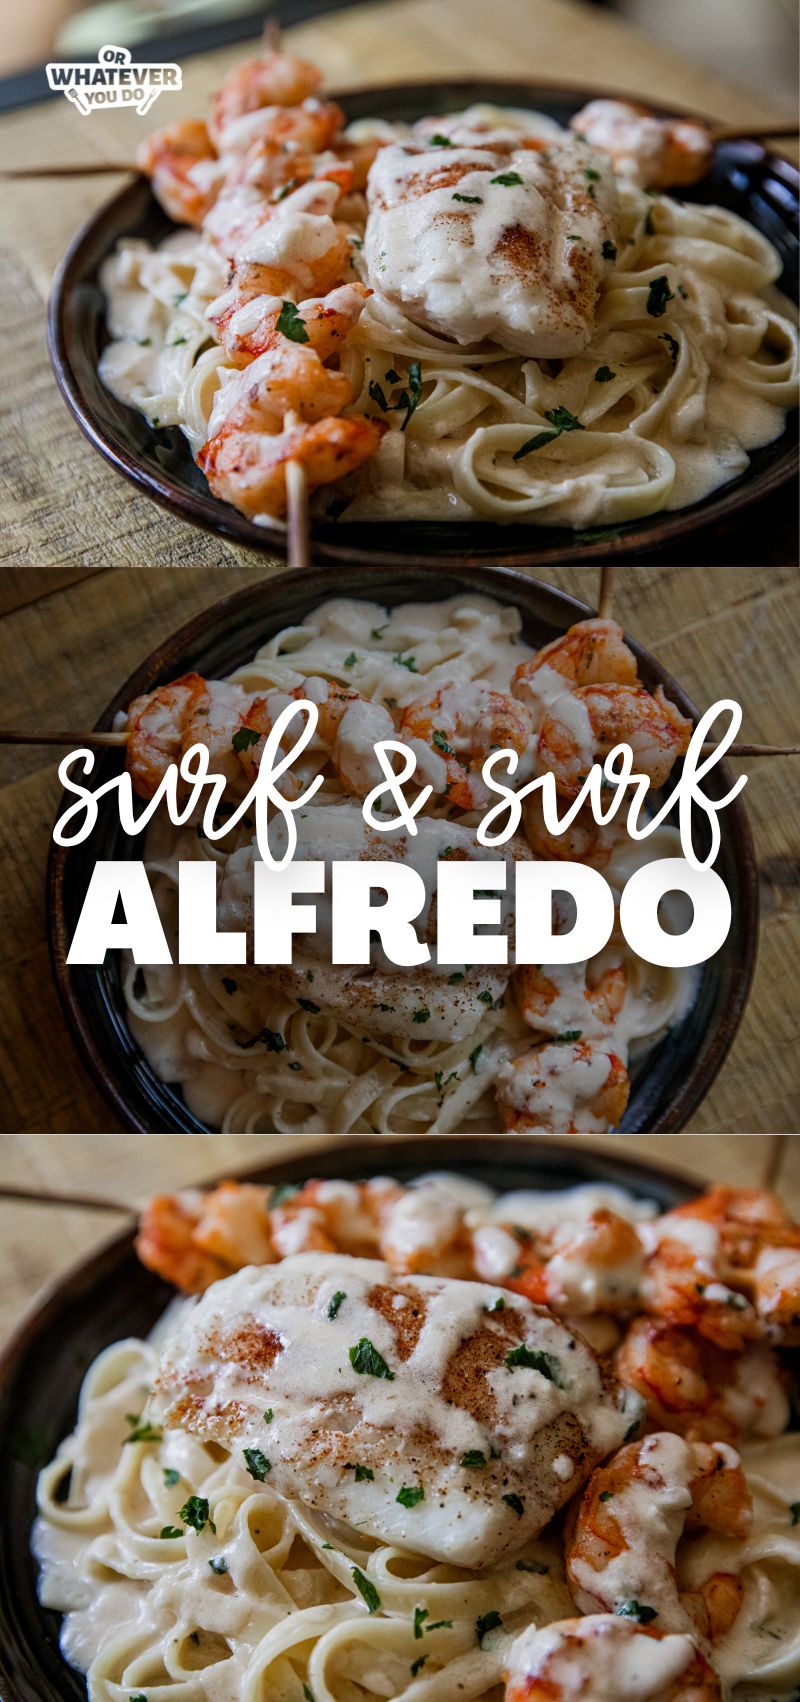 Surf and Surf Alfredo